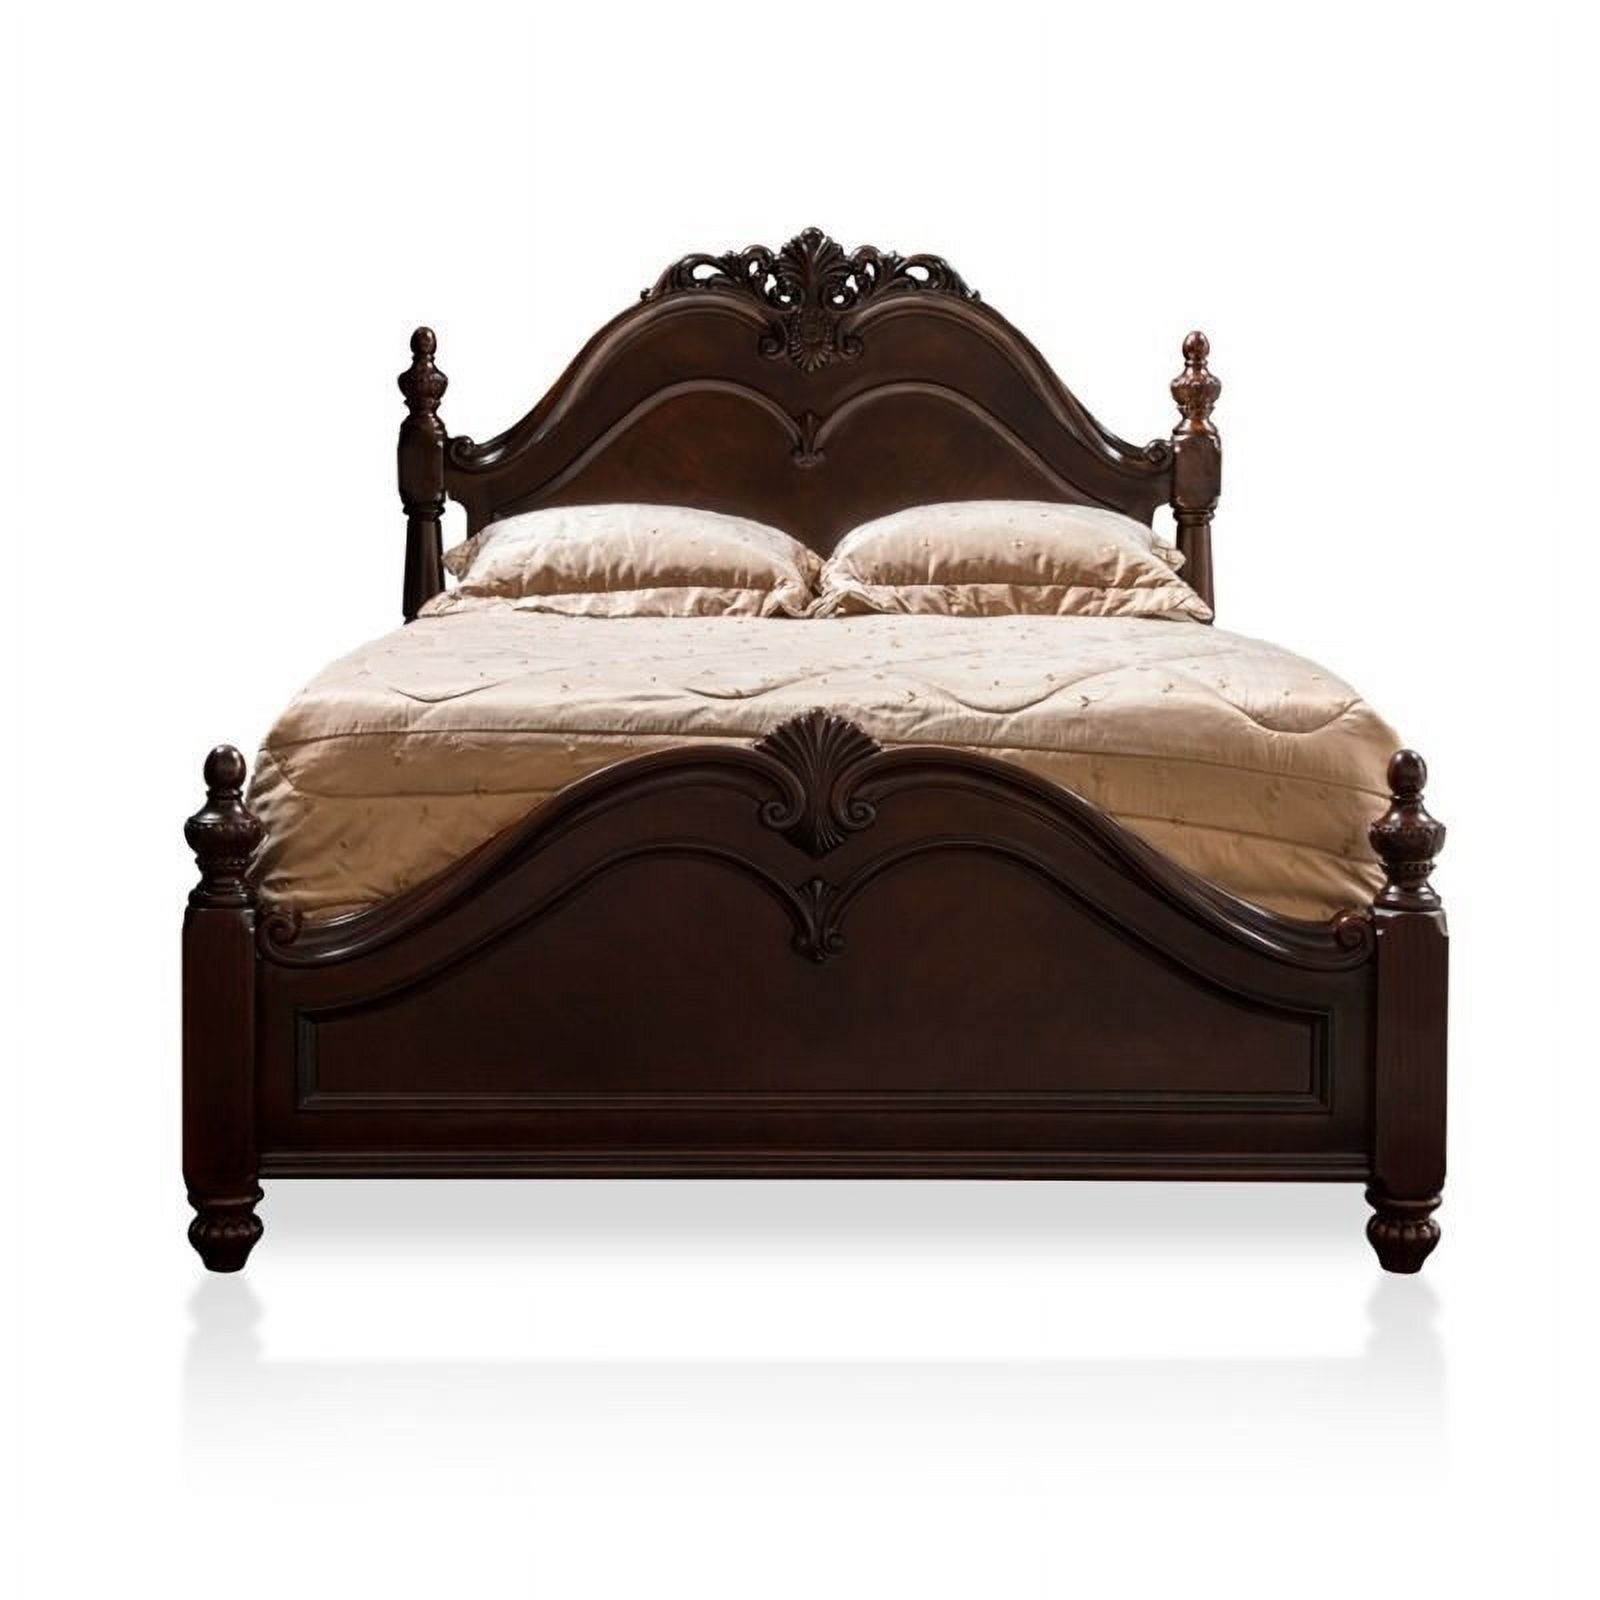 Ruben 2-Piece Cherry Wood Queen Poster Bed and 5-Drawer Chest Set - image 4 of 13